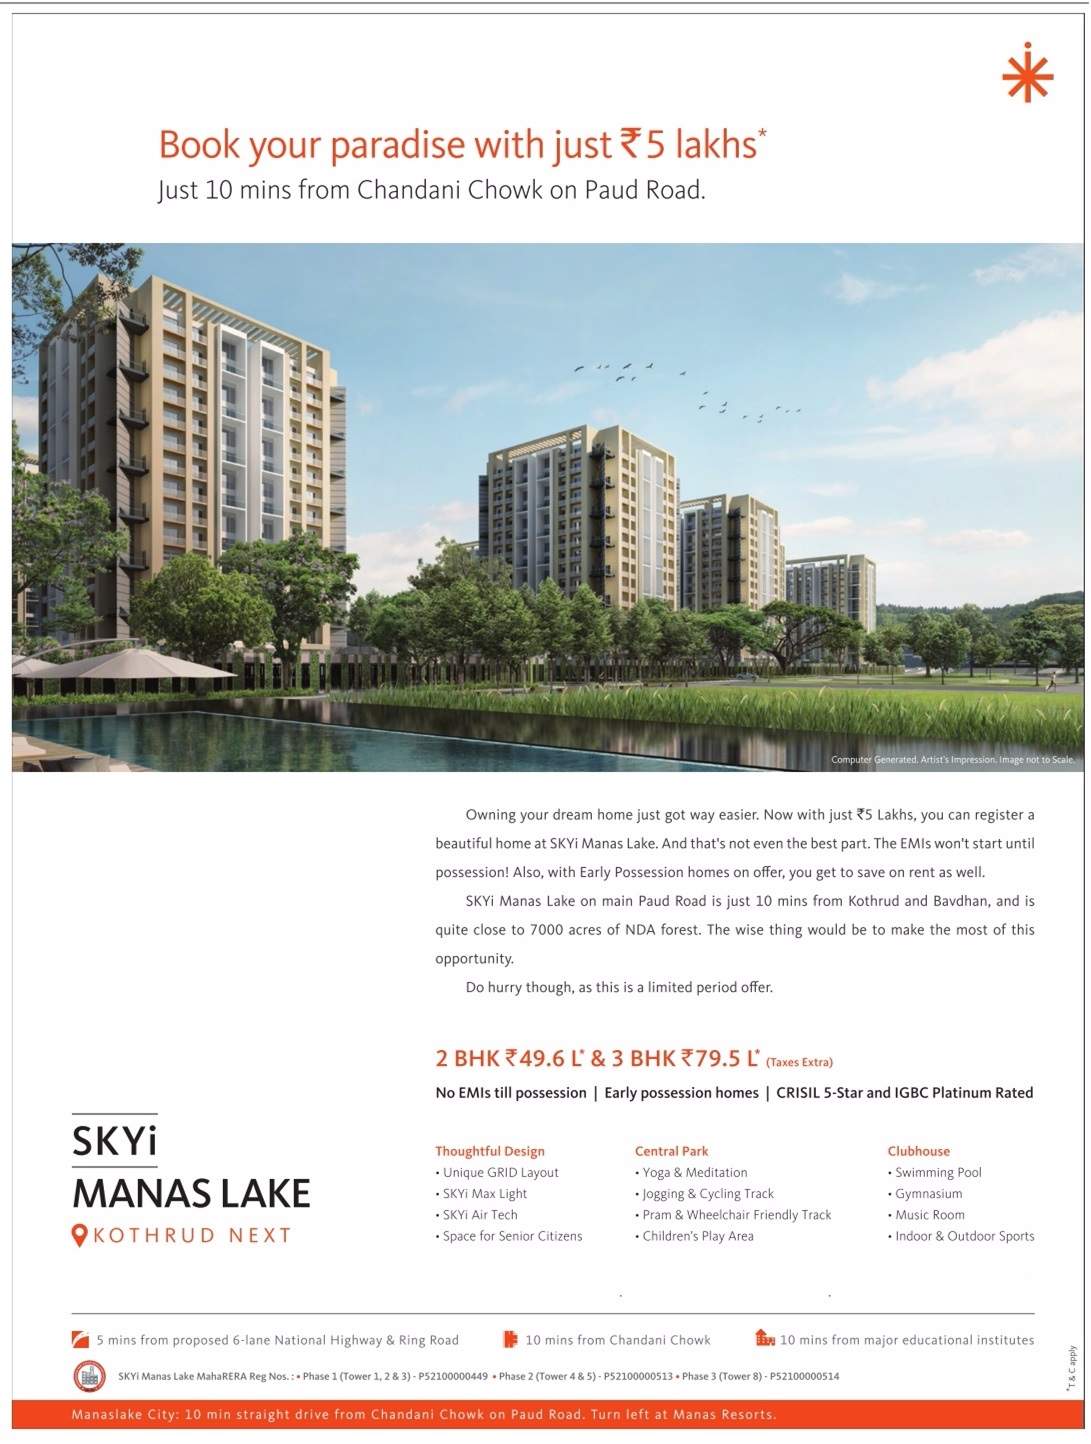 Book your paradise with just Rs. 5 Iakhs at SkYi Manas Lake in Pune Update